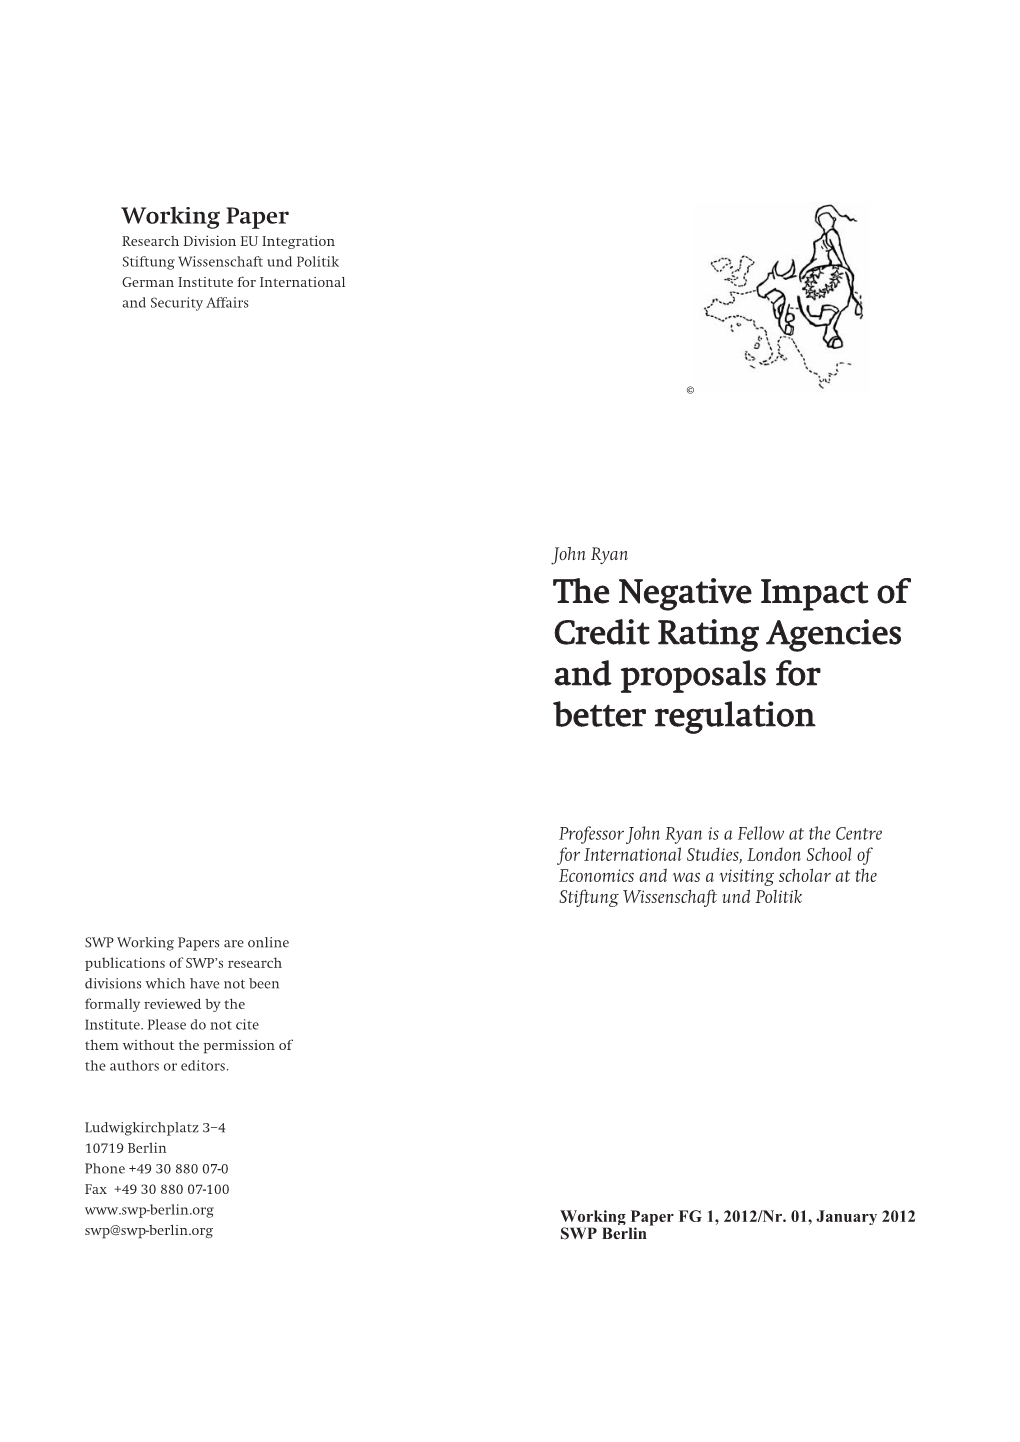 The Negative Impact of Credit Rating Agencies and Proposals for Better Regulation